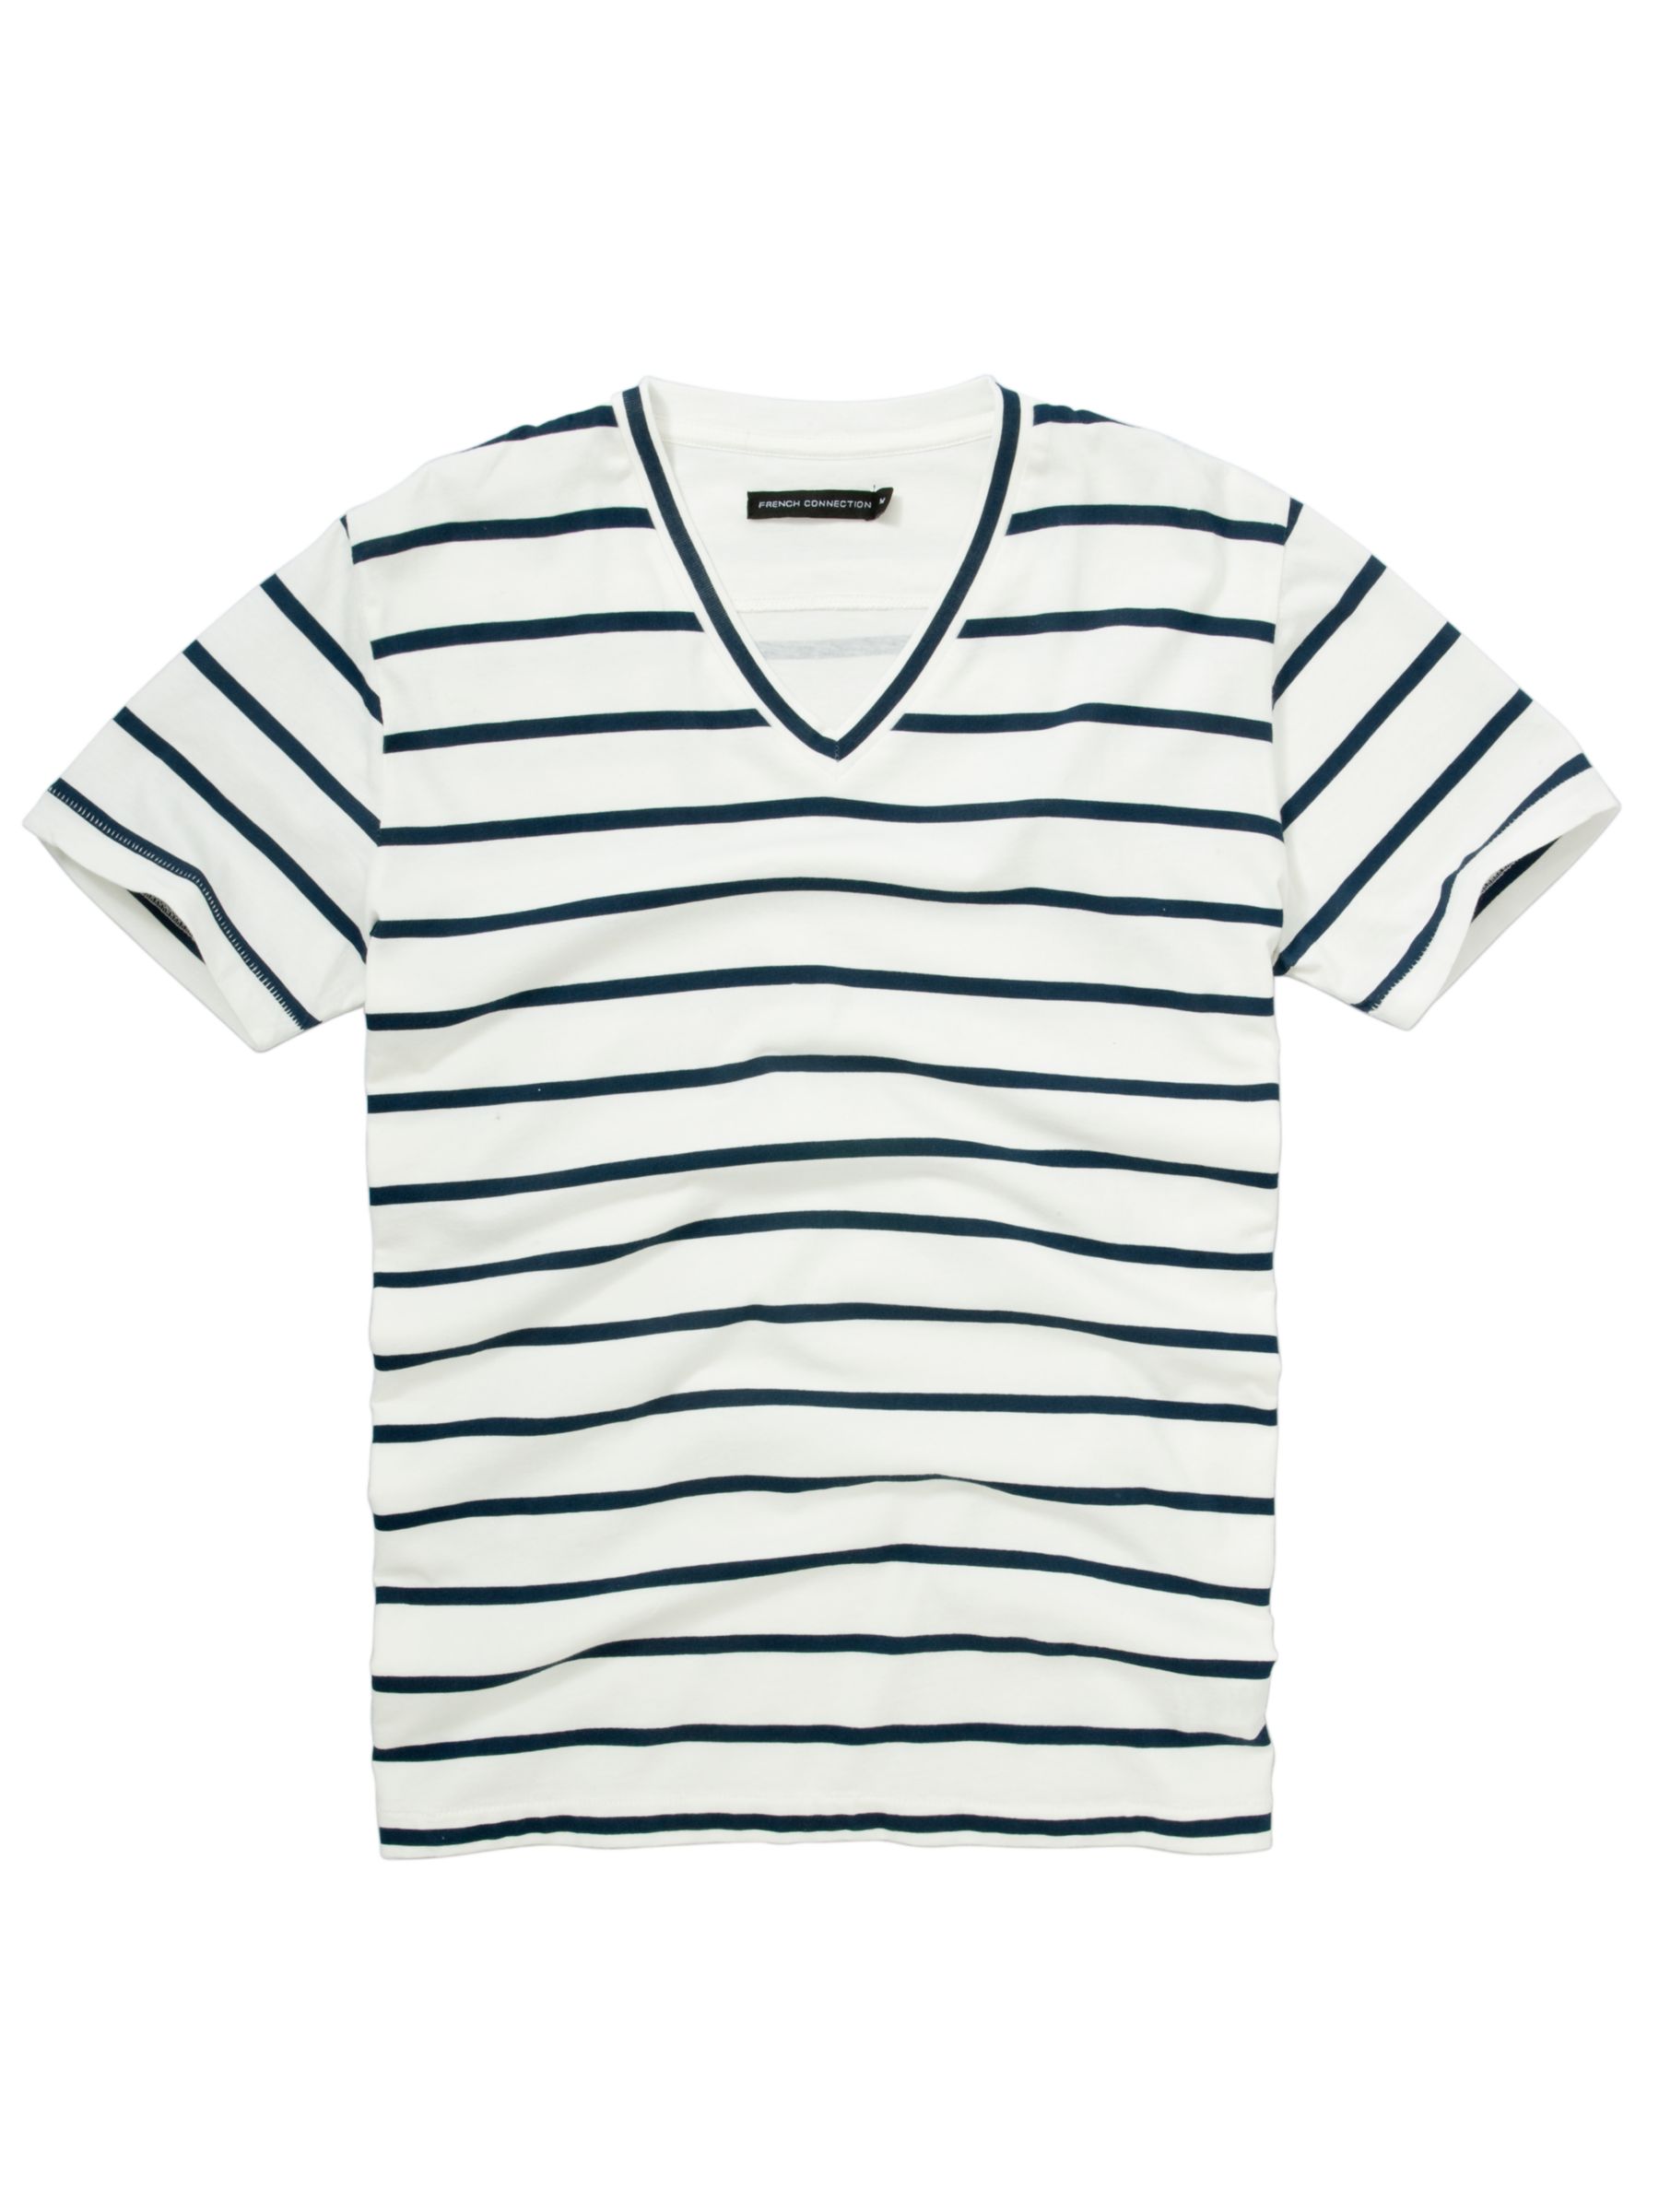 French Connection Stripe Short Sleeve T-Shirt,